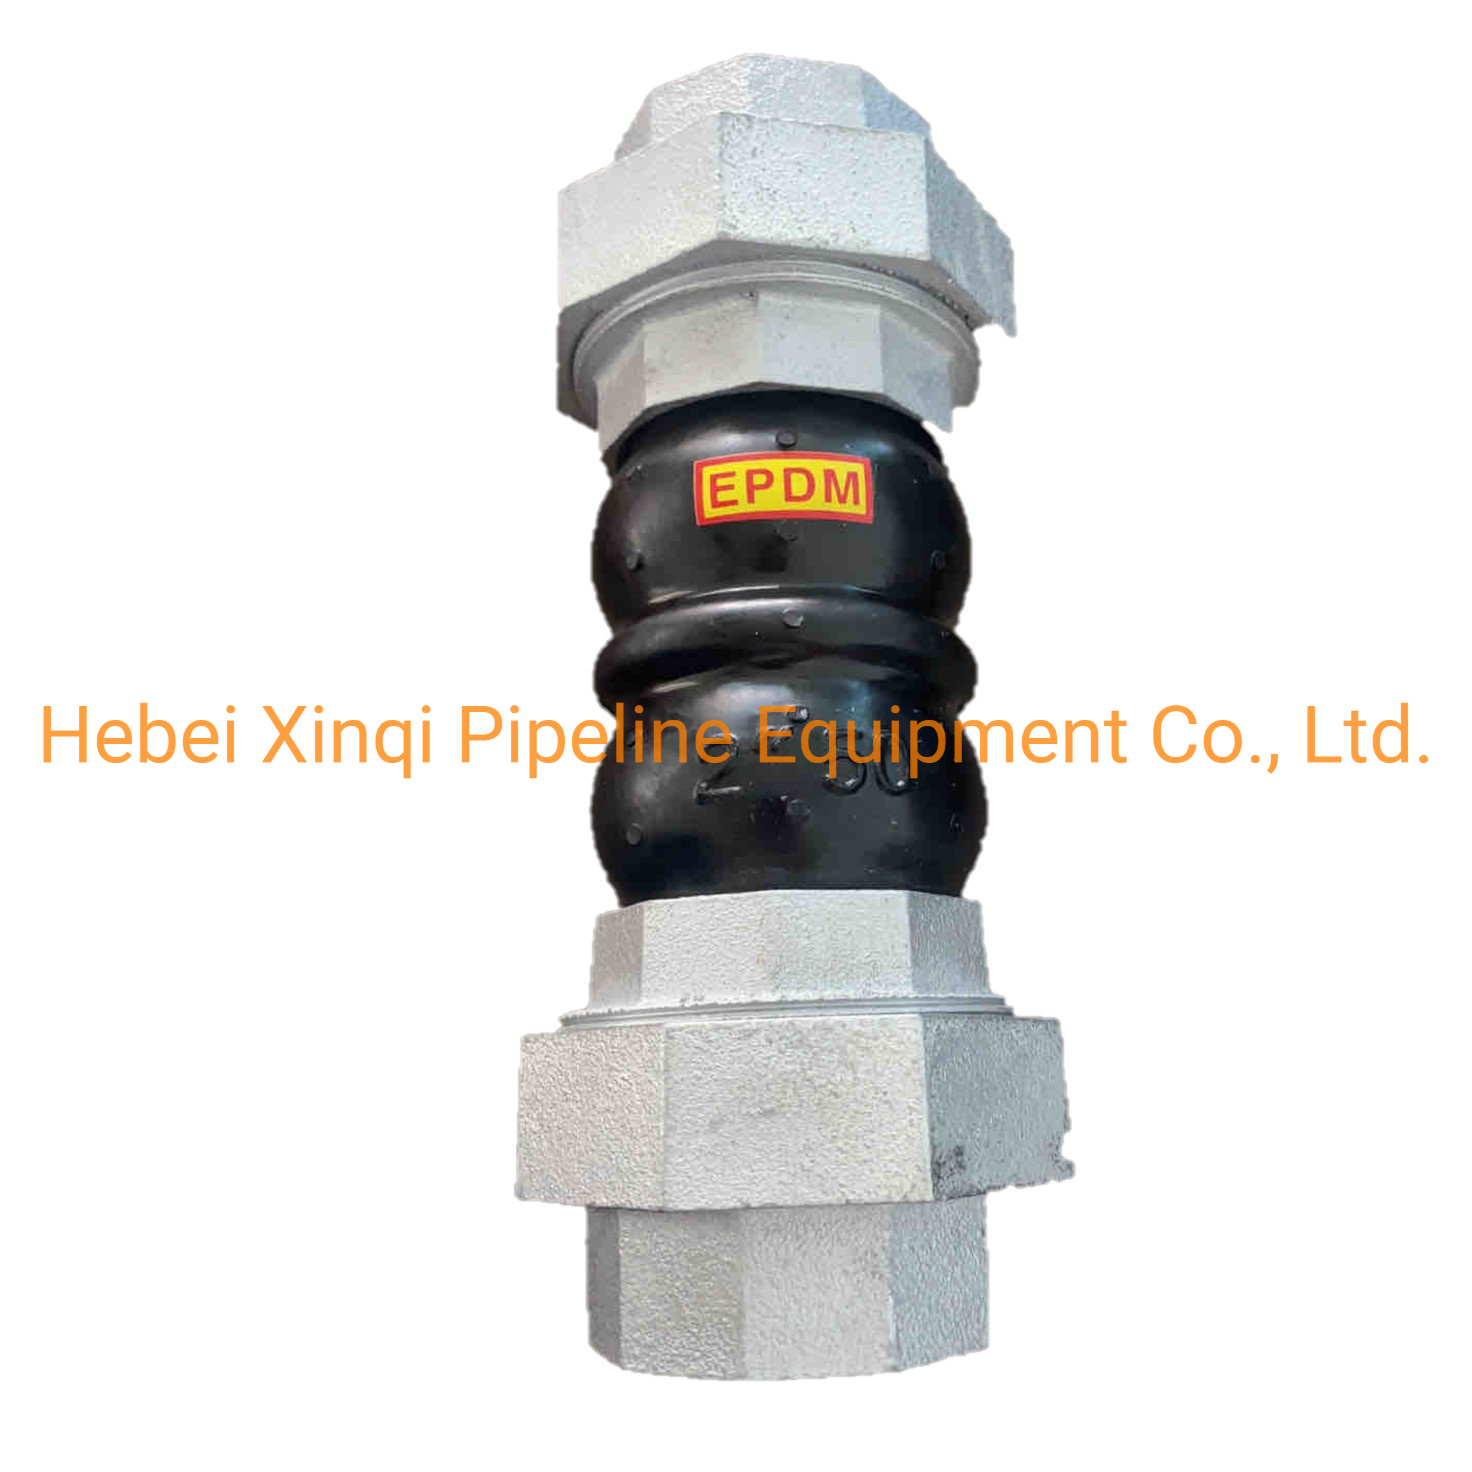 EPDM Rubber Fleksibel Joint Union Threaded Connection